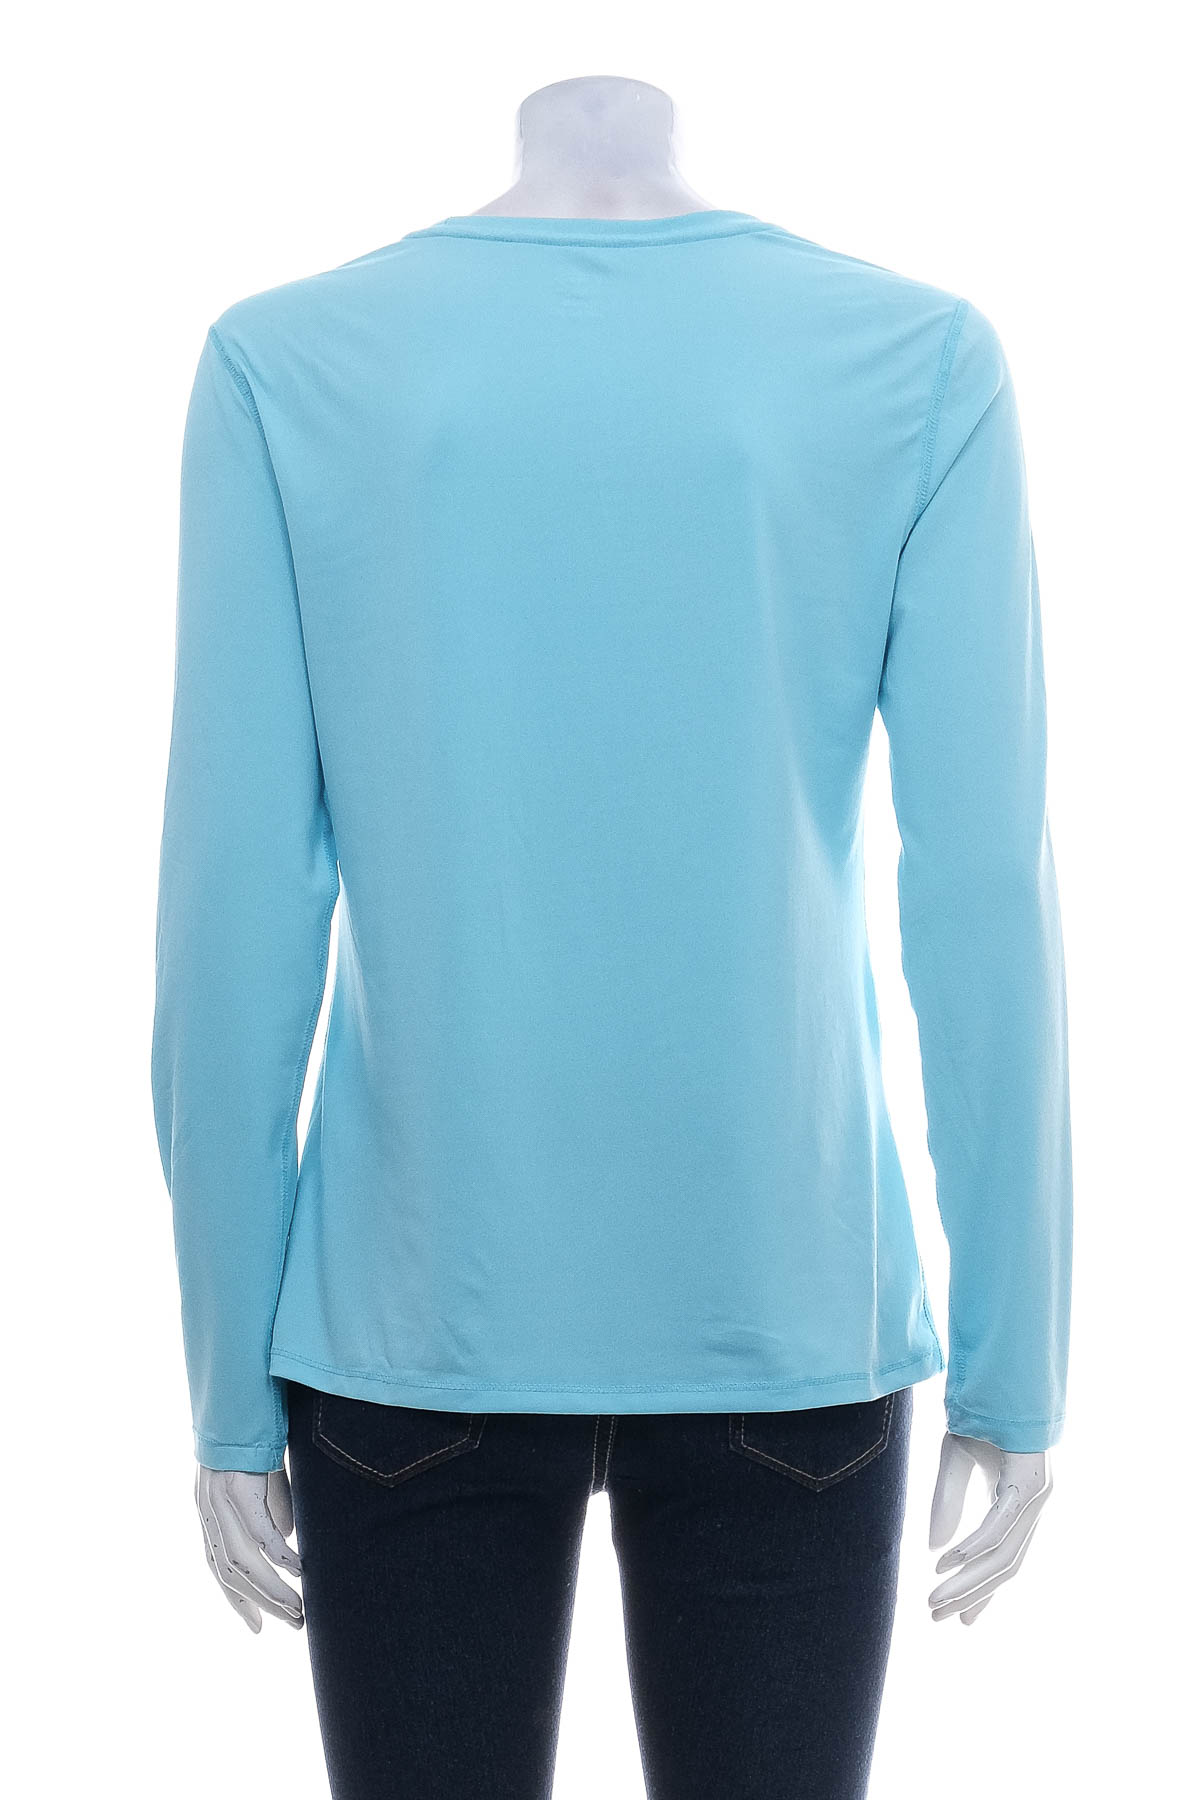 Women's blouse - Athletic Works - 1